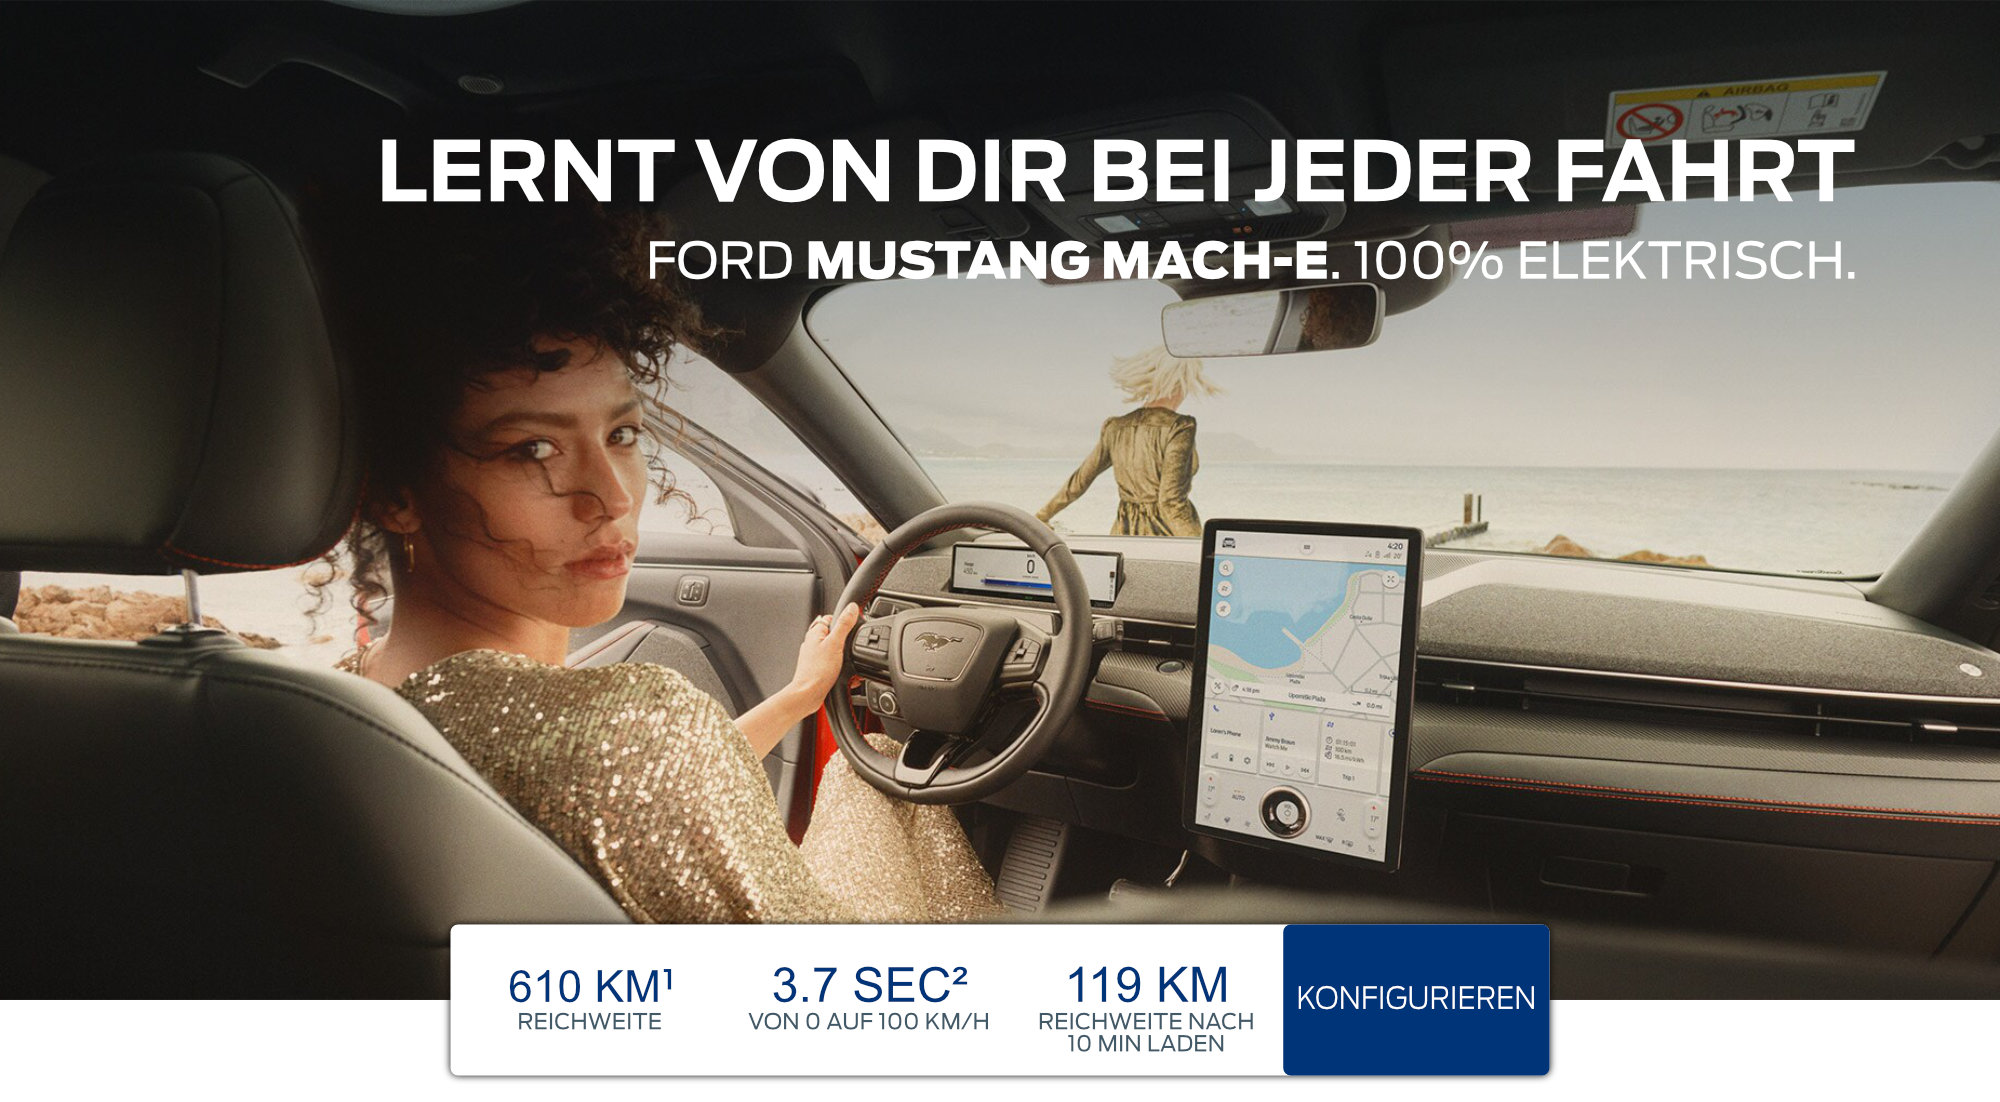 Frau in Mustang Mach-E mit Infotainment System